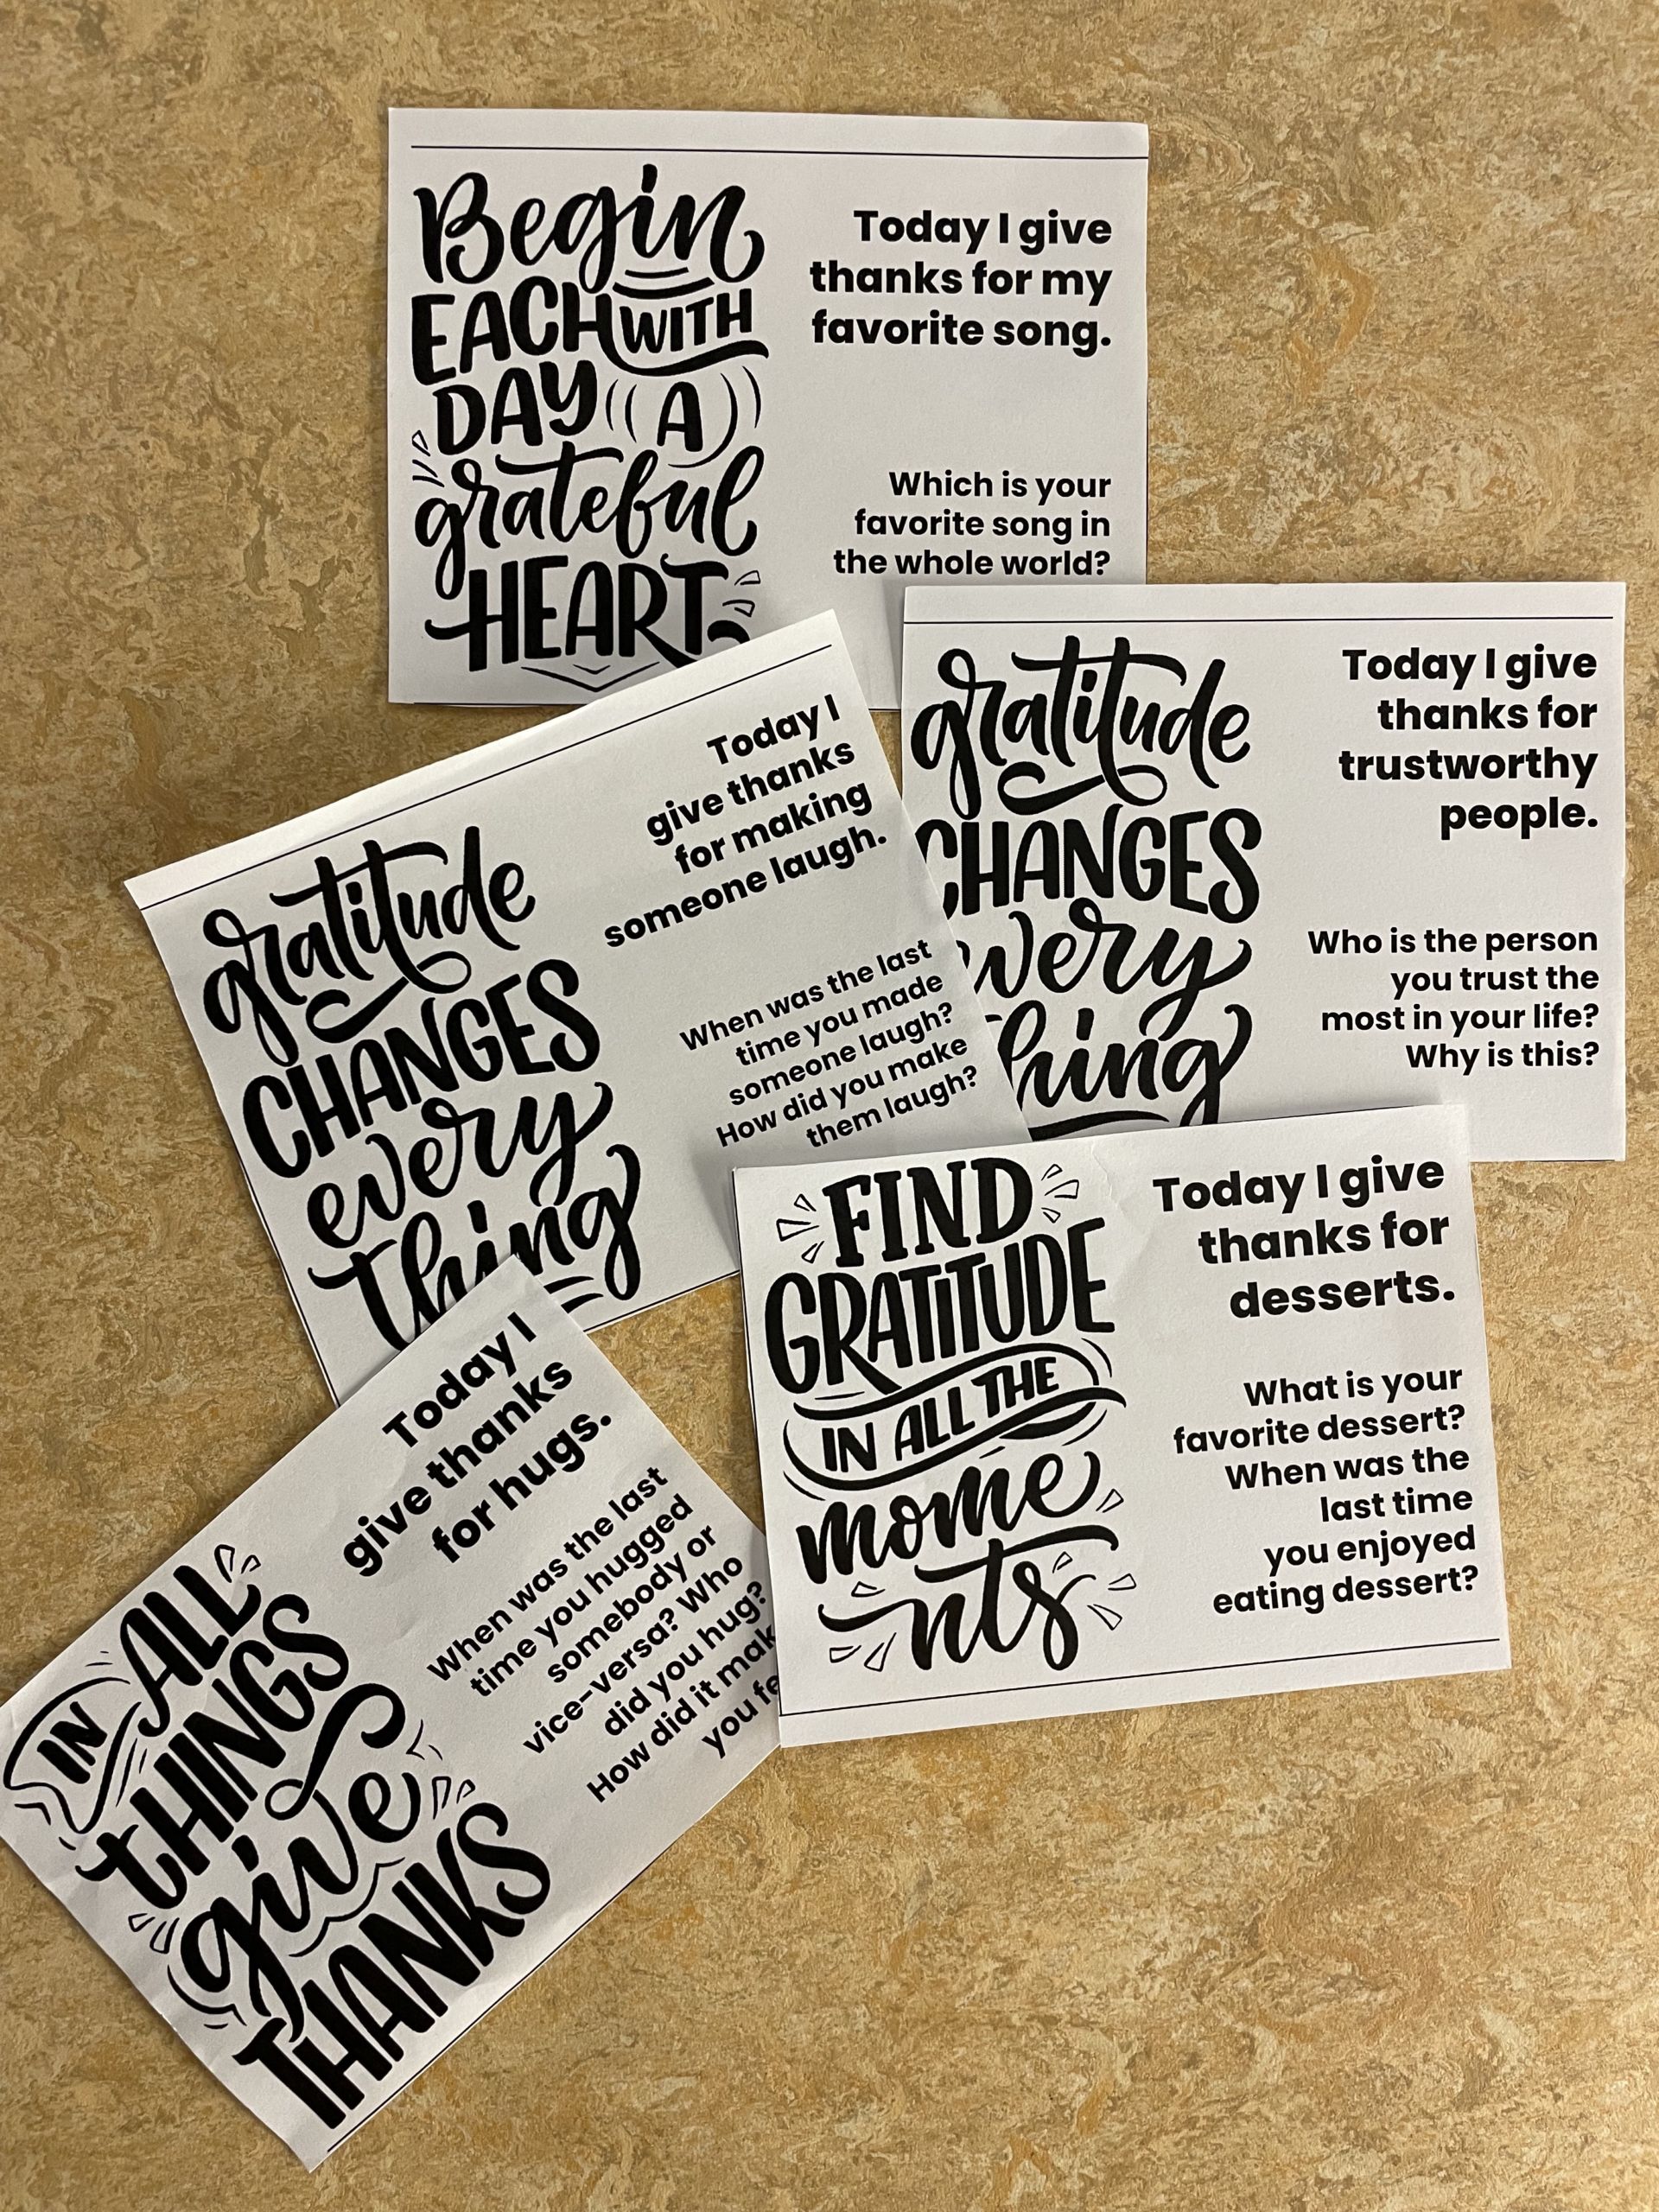 This image shows five gratitude cards at Muchin College Prep. The cards ask students to reflect on different things to be thankful for such as "Trustworthy people, desserts, hugs, making someone laugh, and favorite songs"